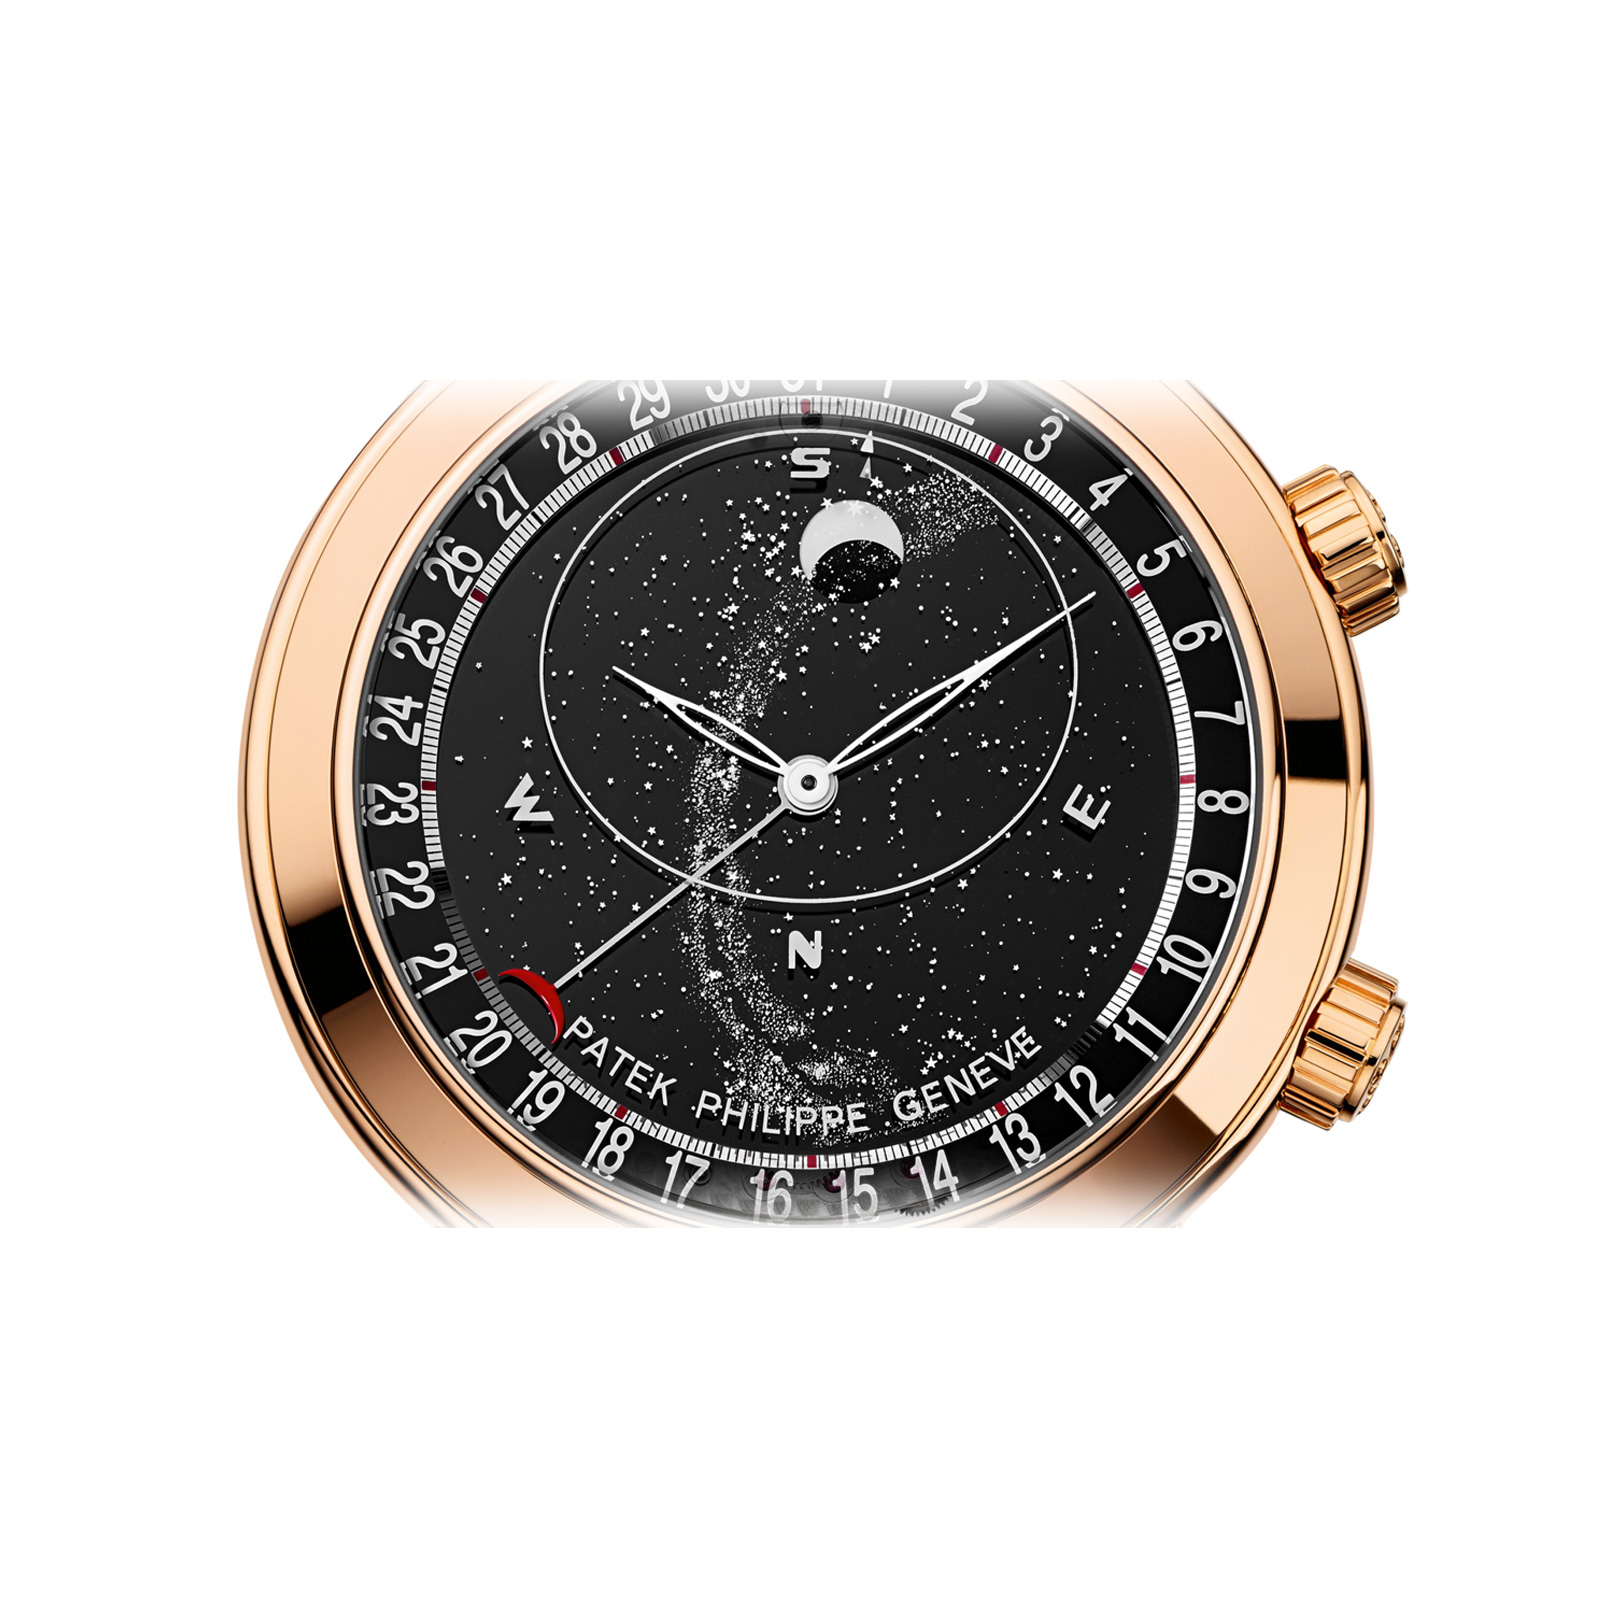 Grand Complications Rose Gold Celestial gallery 6